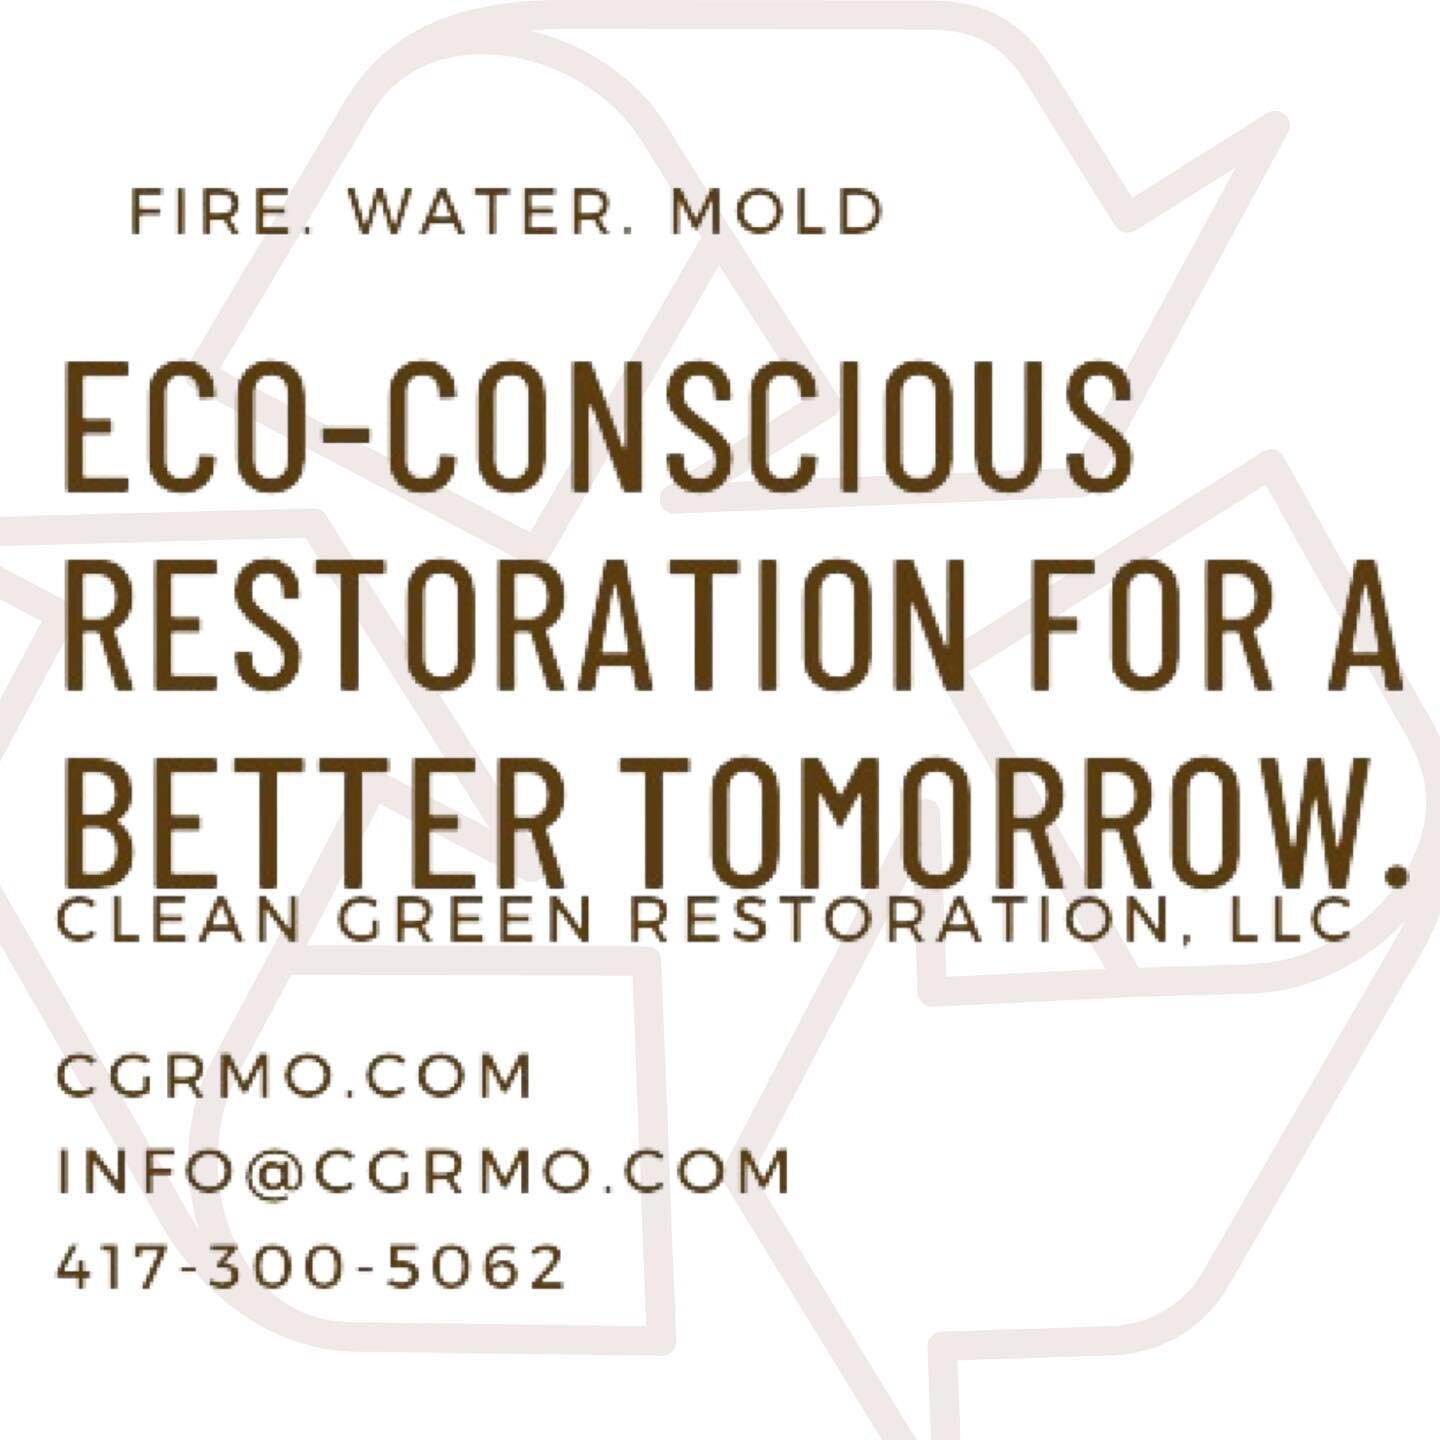 If you need fire, water or mold restoration services, you want a company that is not only reliable and professional, but also eco-conscious and family-friendly. That's why you should choose Clean Green Restoration LLC of Nixa, MO. We are a local comp